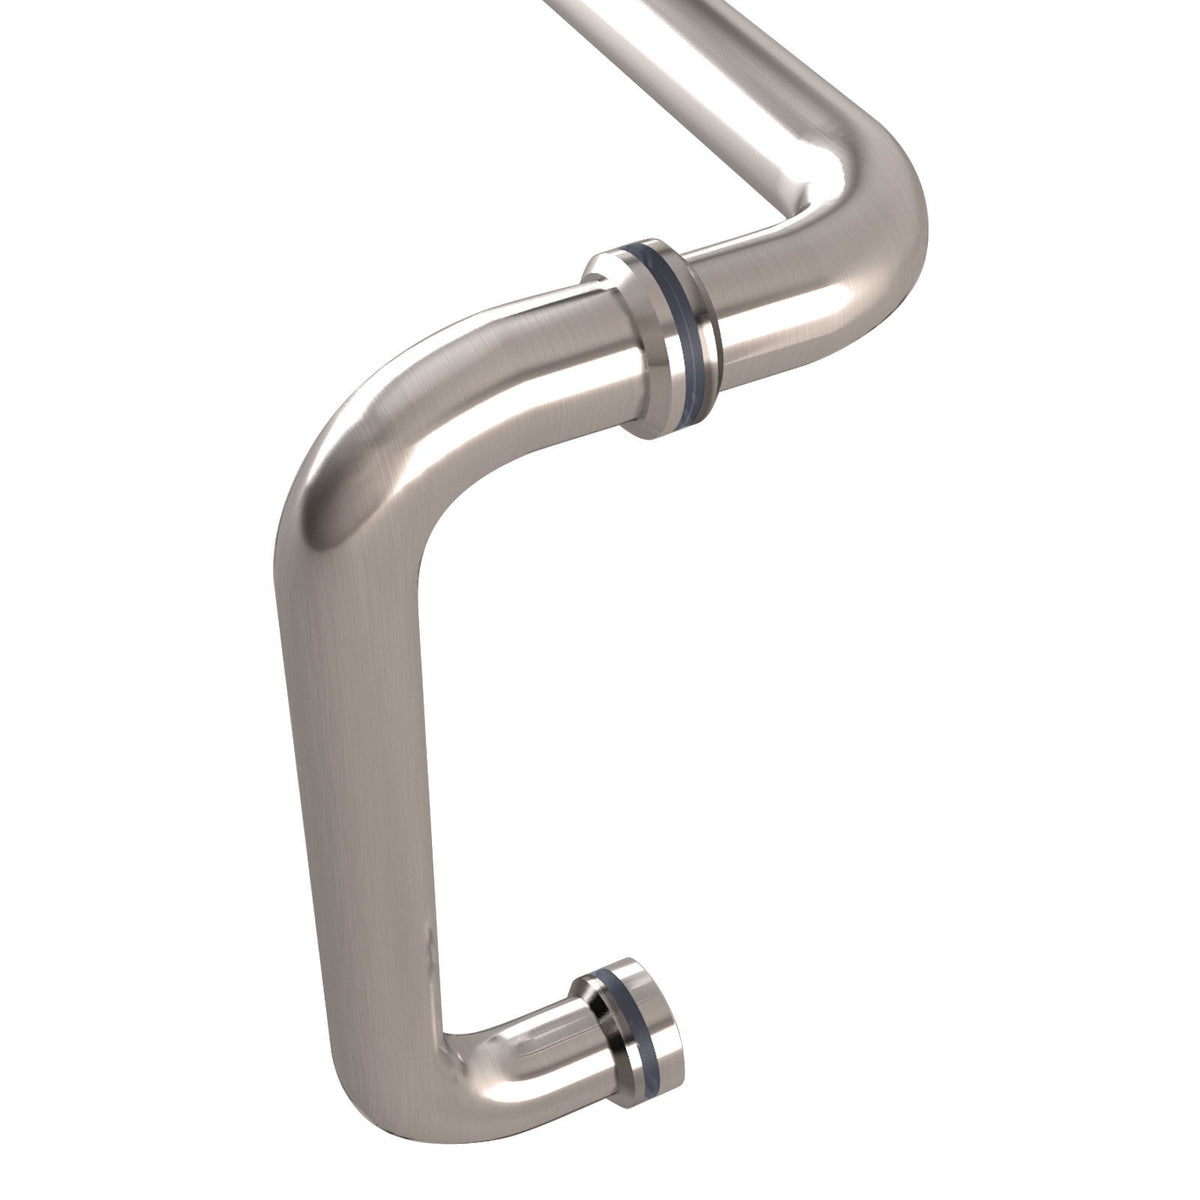 Sunny Shower Brushed Nickel Pull Handle and Towel Bar Combination with Metal Washer L-6X18-BN - SUNNY SHOWER